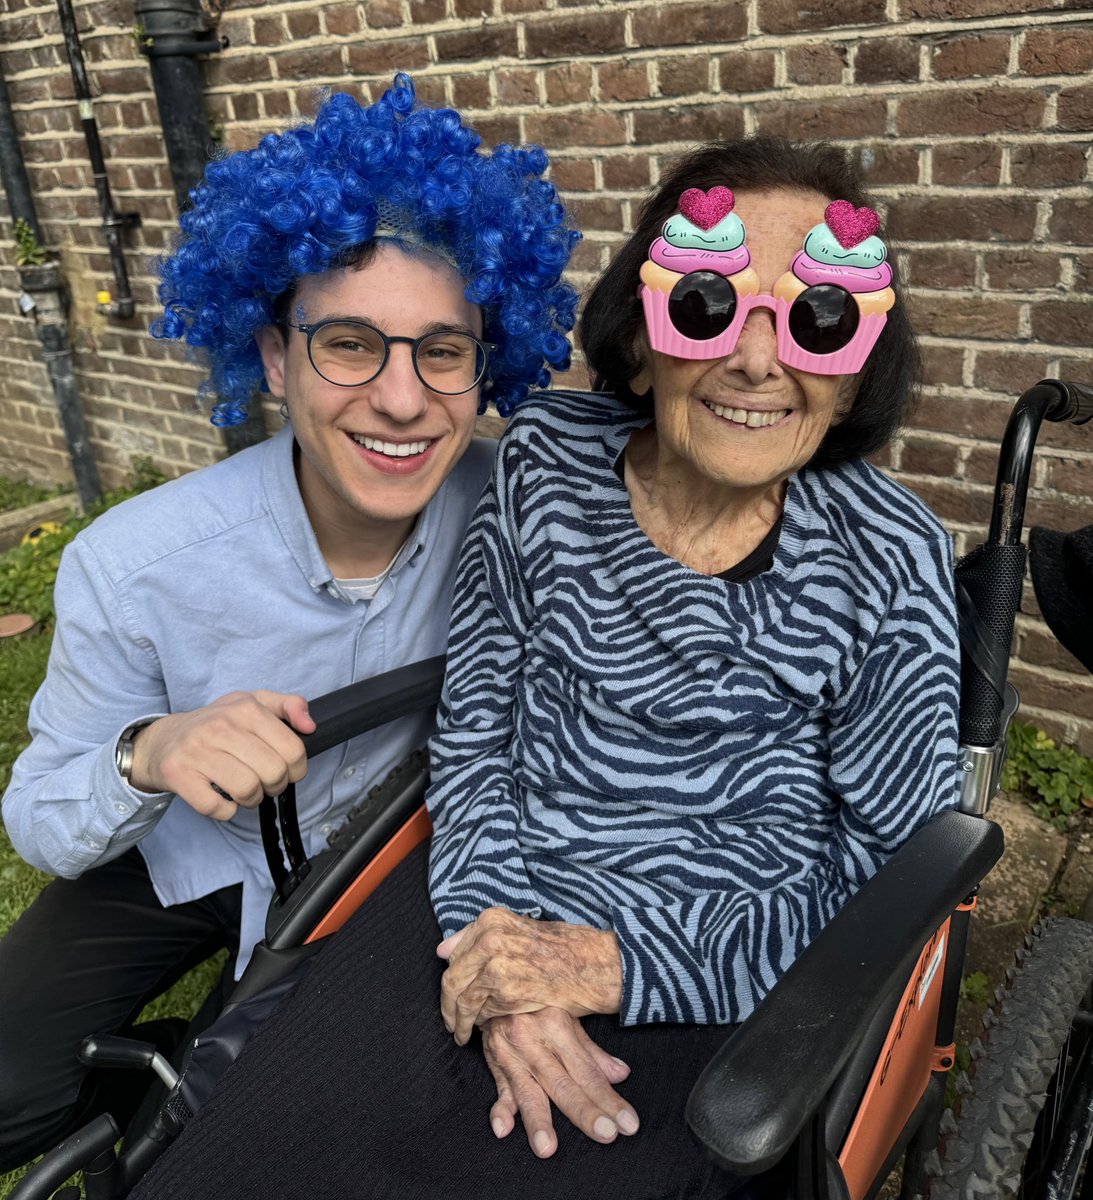 In the purim story, Jews were deemed for extinction. However, the Jews persevered and survived. Today, I celebrate purim with my great grandmother, Lily Ebert, a 100 year-old Auschwitz survivor. Neither Haman, Hitler nor Hamas can break our spirit. Happy Purim ❤️